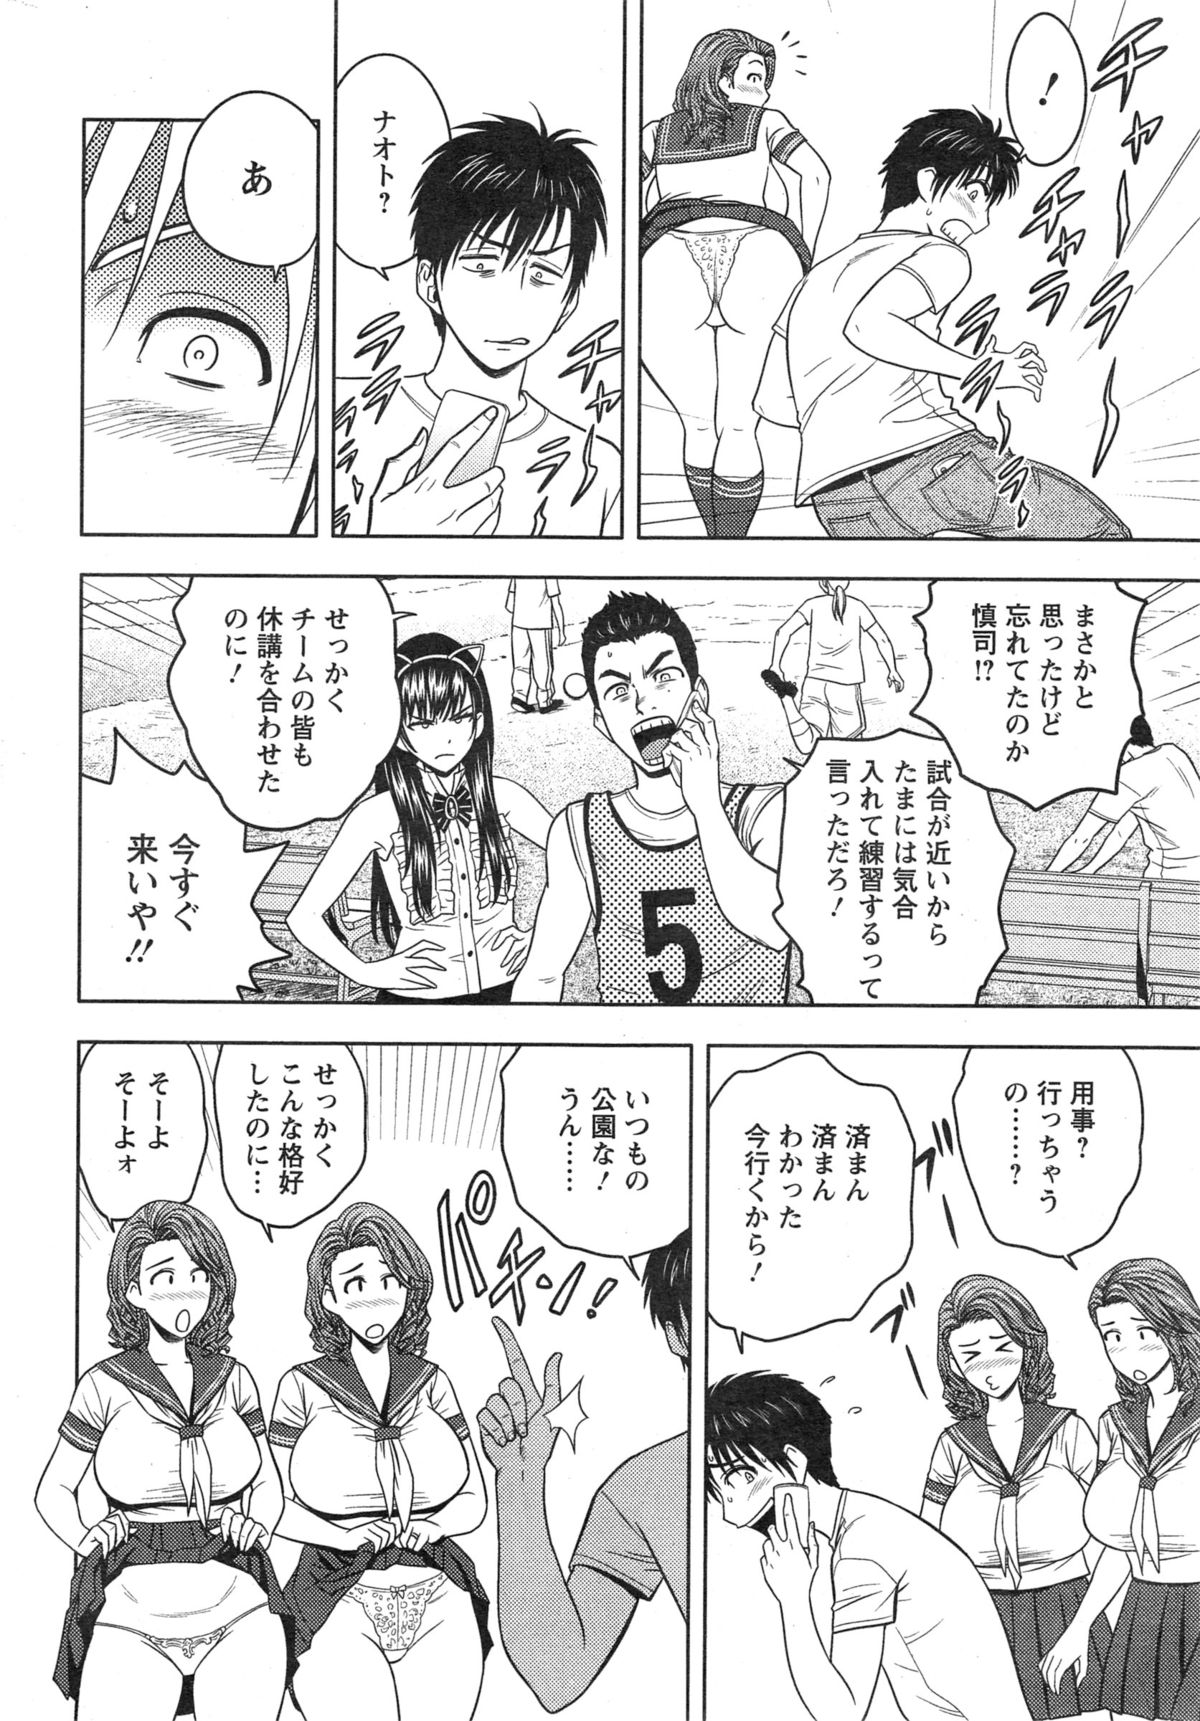 Action Pizazz Cgumi 2015-02 page 34 full